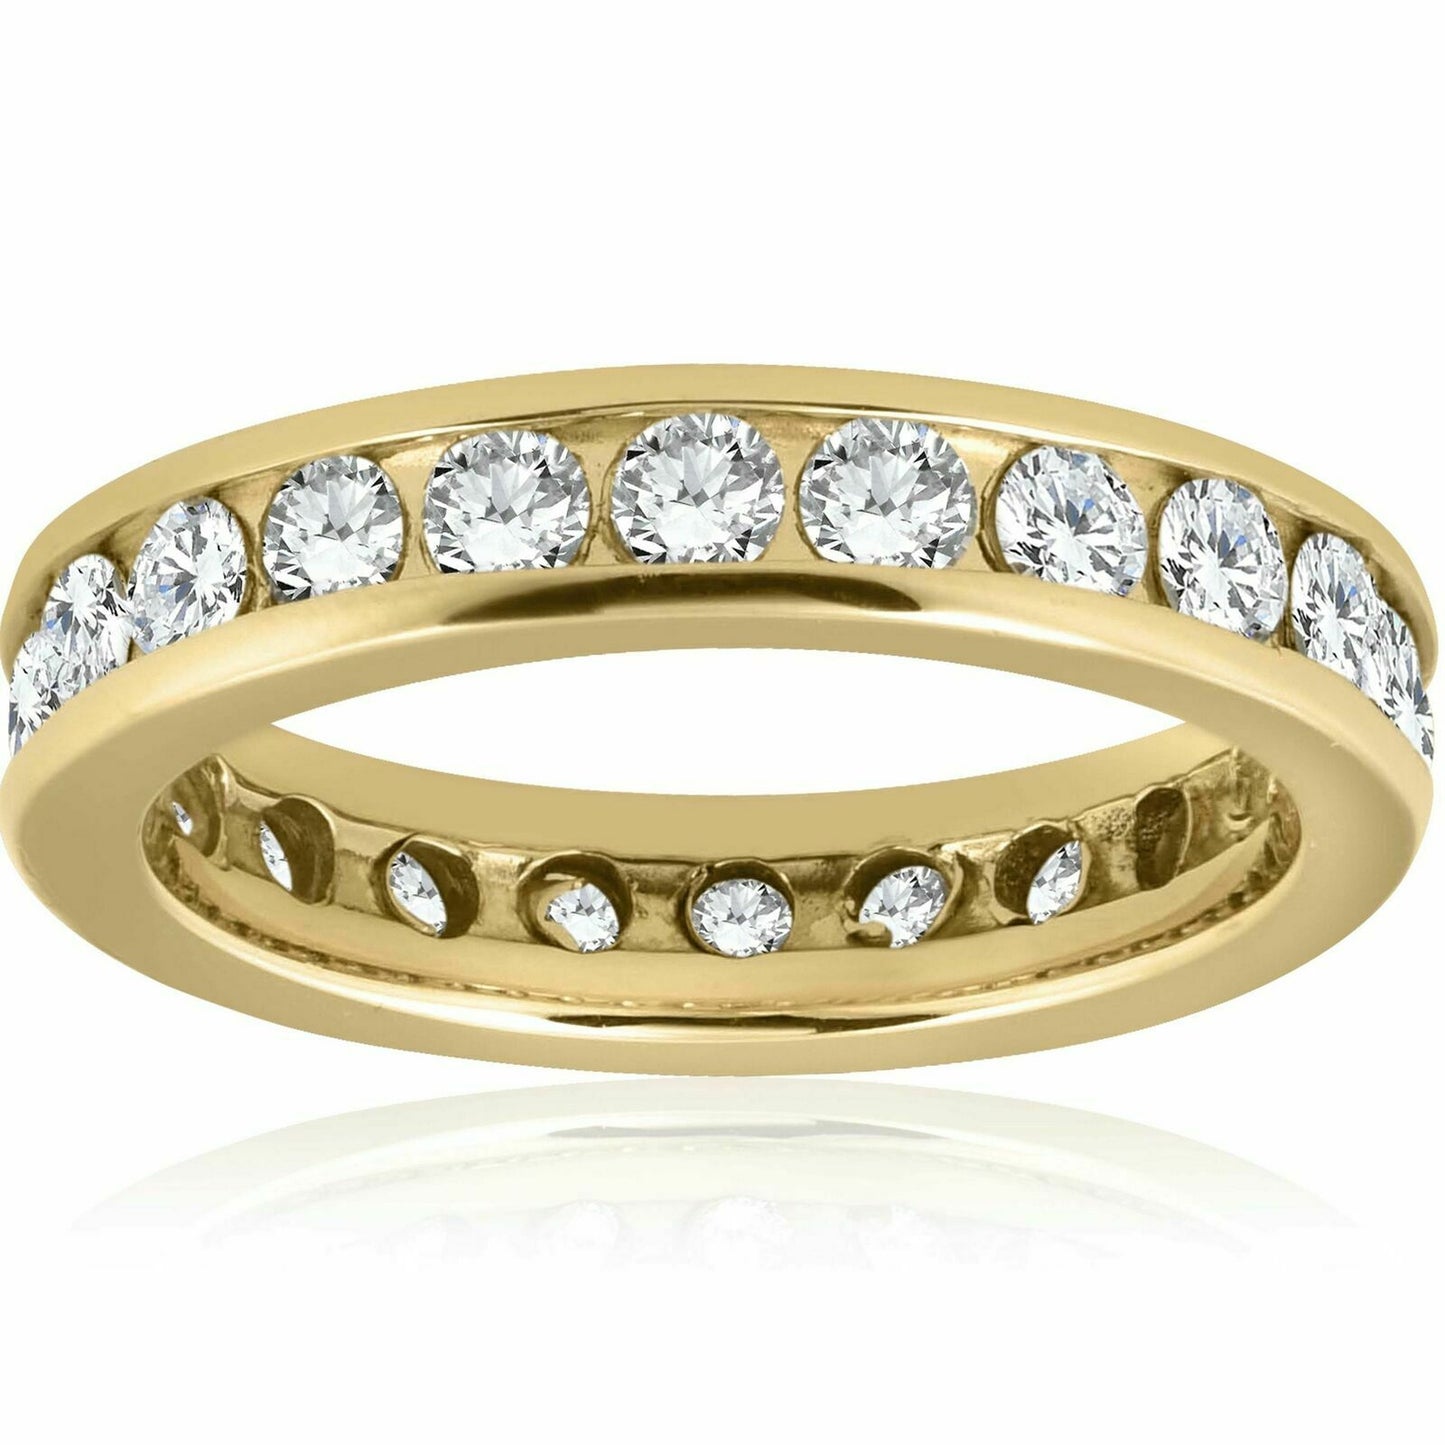 14K Yellow Gold 2 ct Channel Set Eternity Womens Anniversary Wedding Band Ring